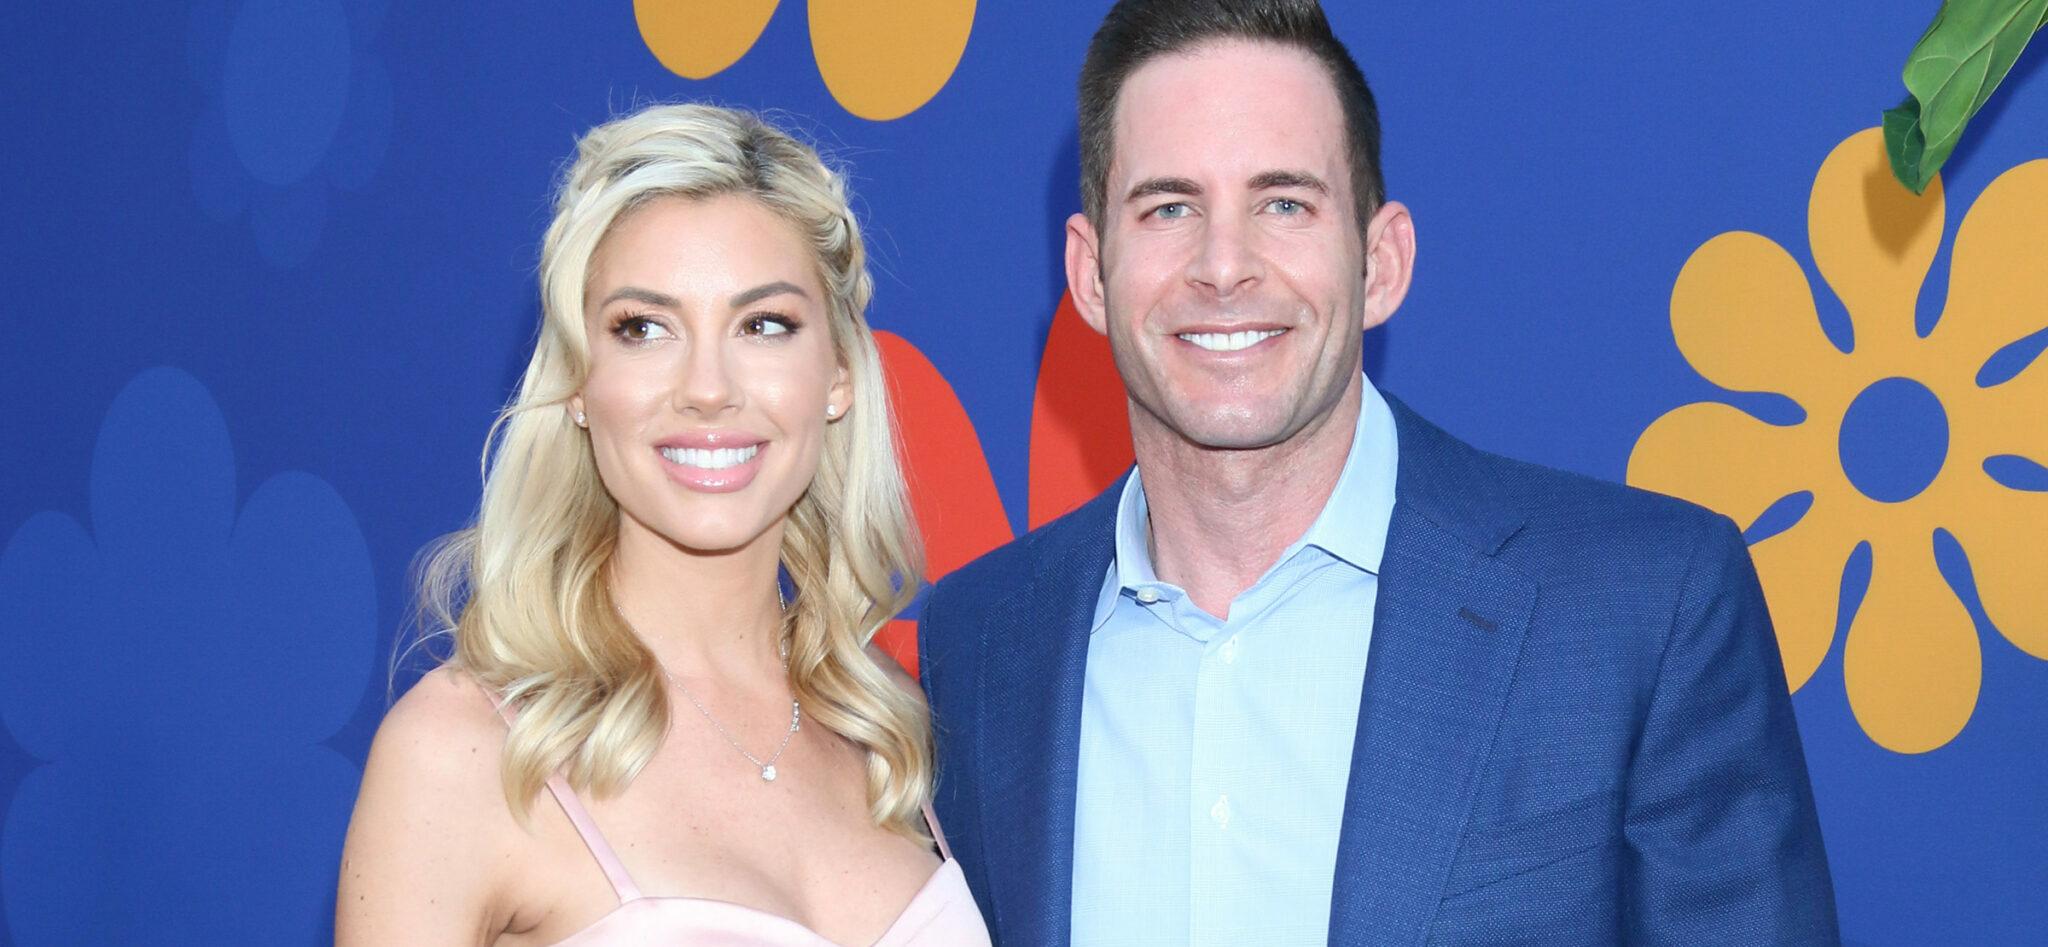 Tarek El Moussa First REACTED This Way To Pregnancy News From Heather Rae Young